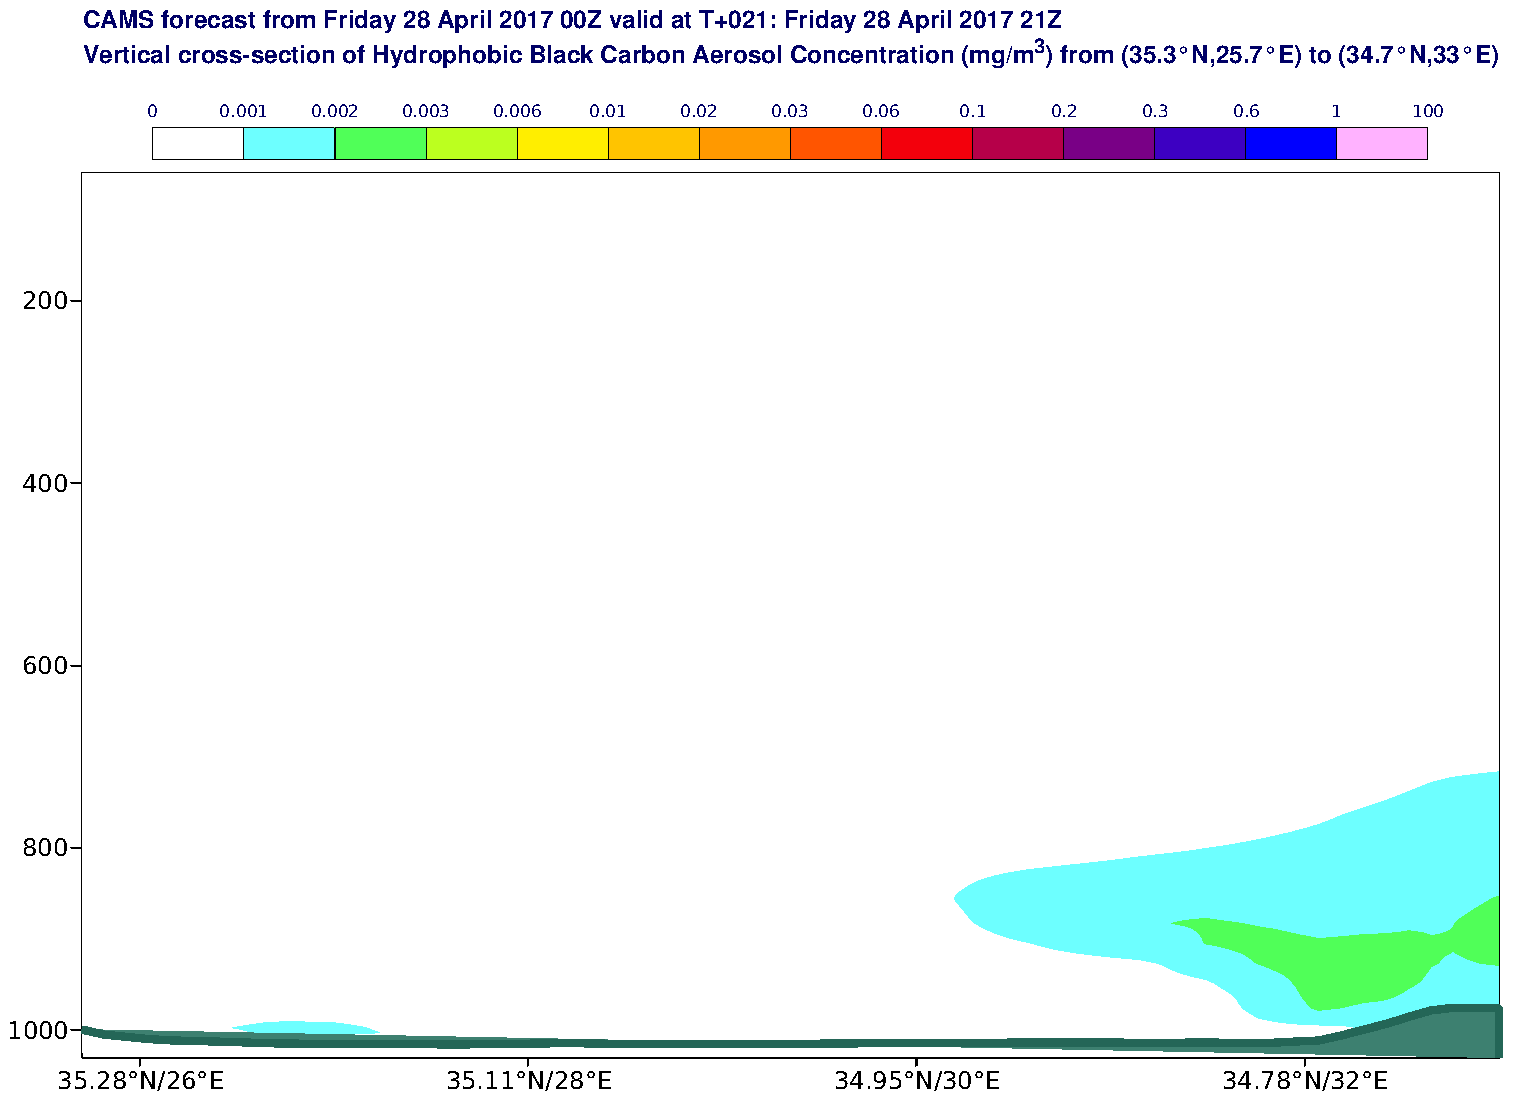 Vertical cross-section of Hydrophobic Black Carbon Aerosol Concentration (mg/m3) valid at T21 - 2017-04-28 21:00